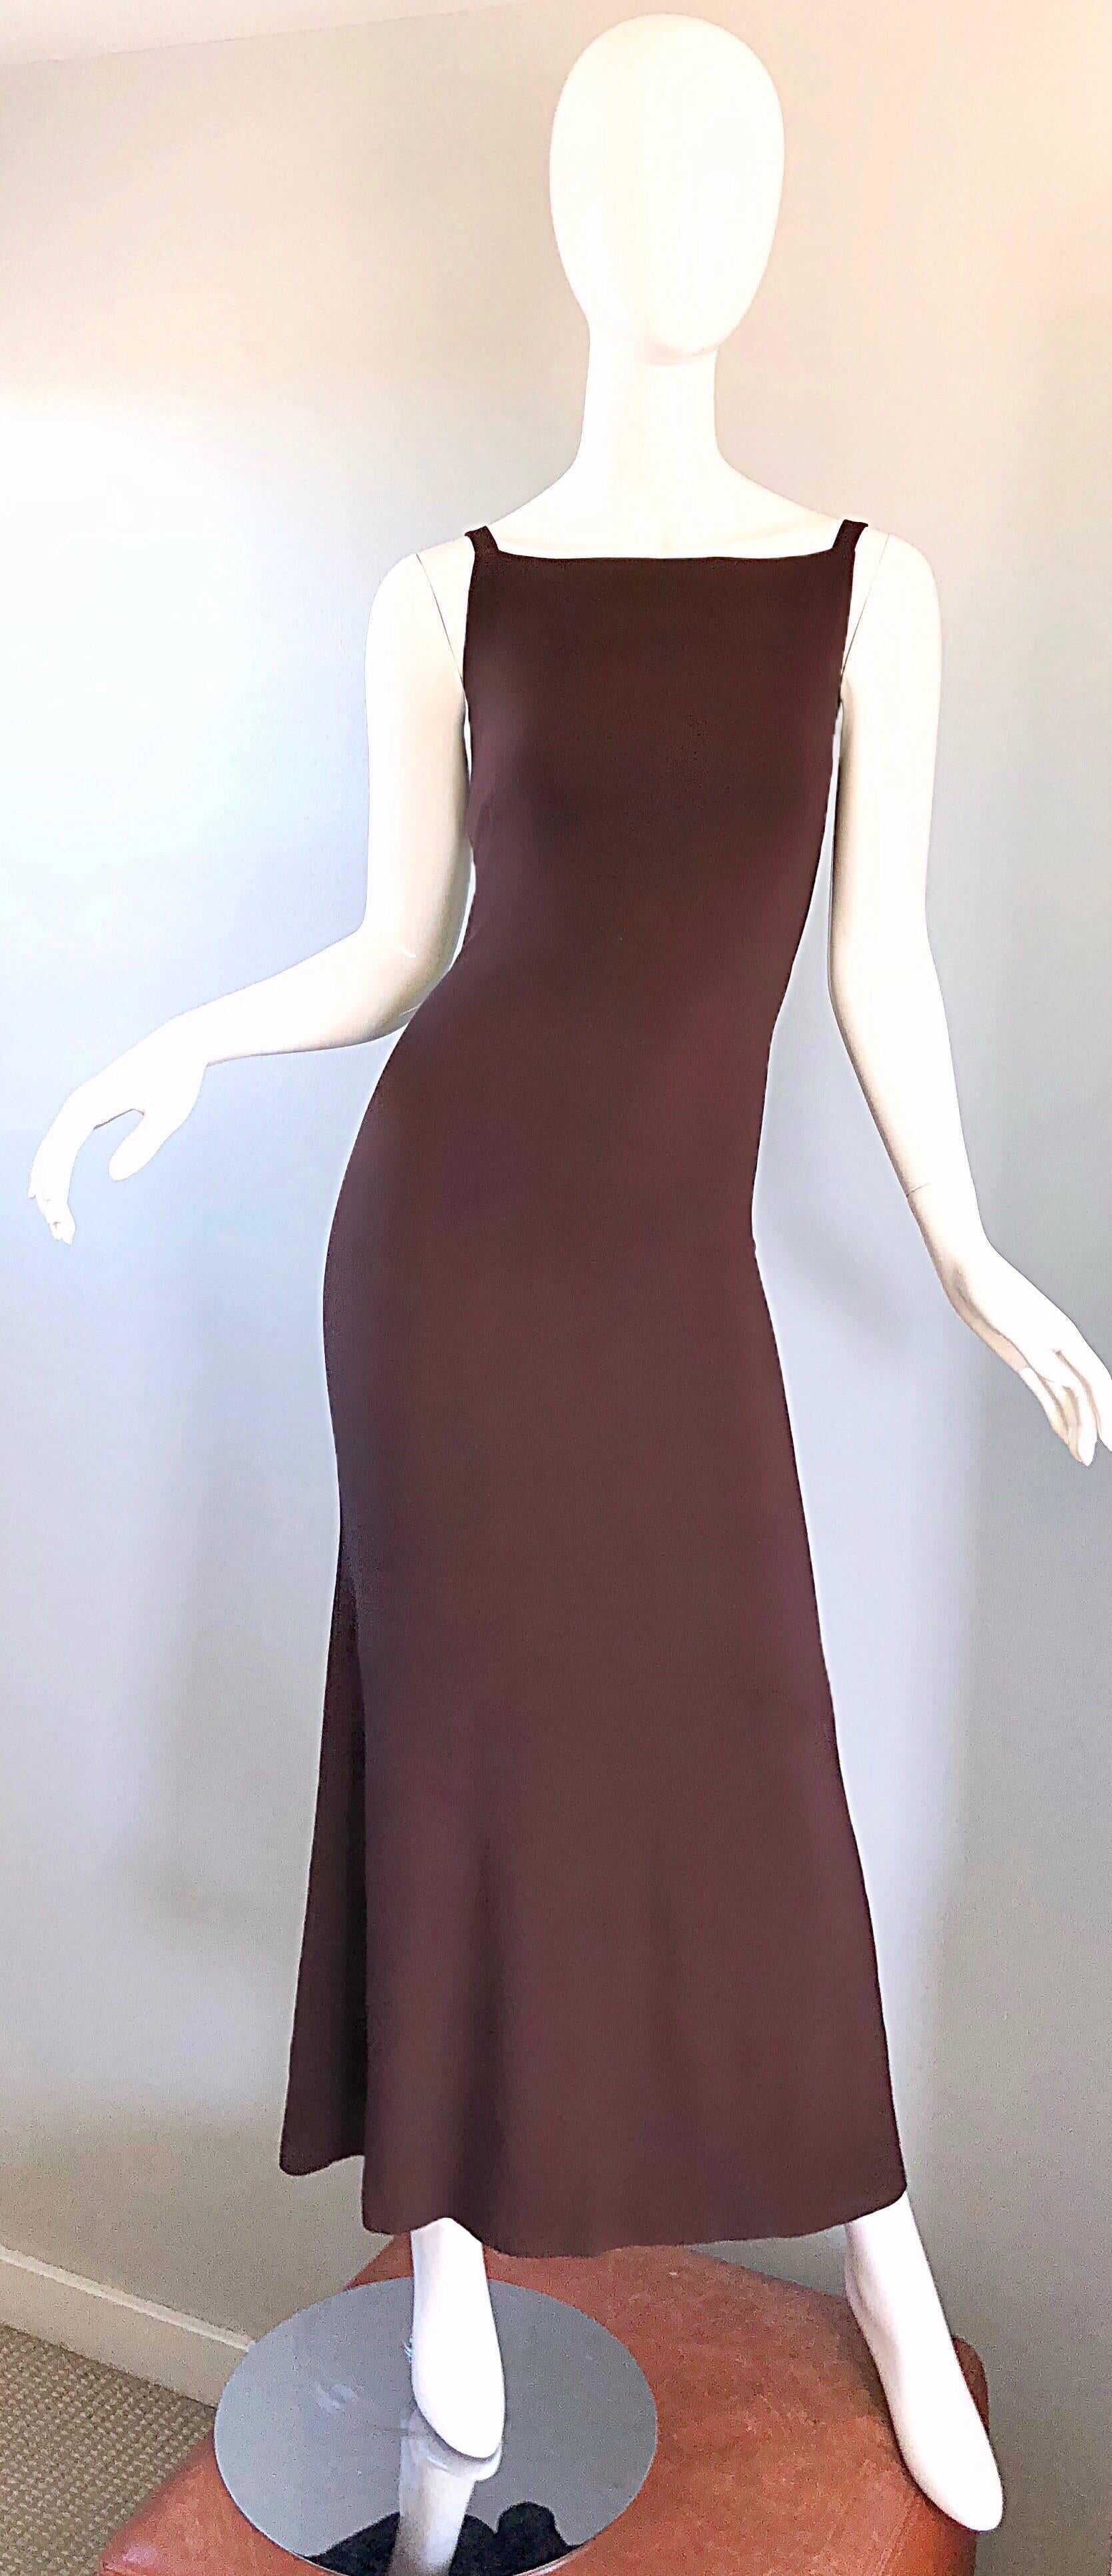 Sexy, yet sophisticated early 90s JEAN PAUL GAULTIER chocolate brown 'scar' full length evening dress! Features a form fitting bodice. Hidden zipper up the back with hook-and-eye closure. Features a 'scar' detail, which is shaped like a V just below